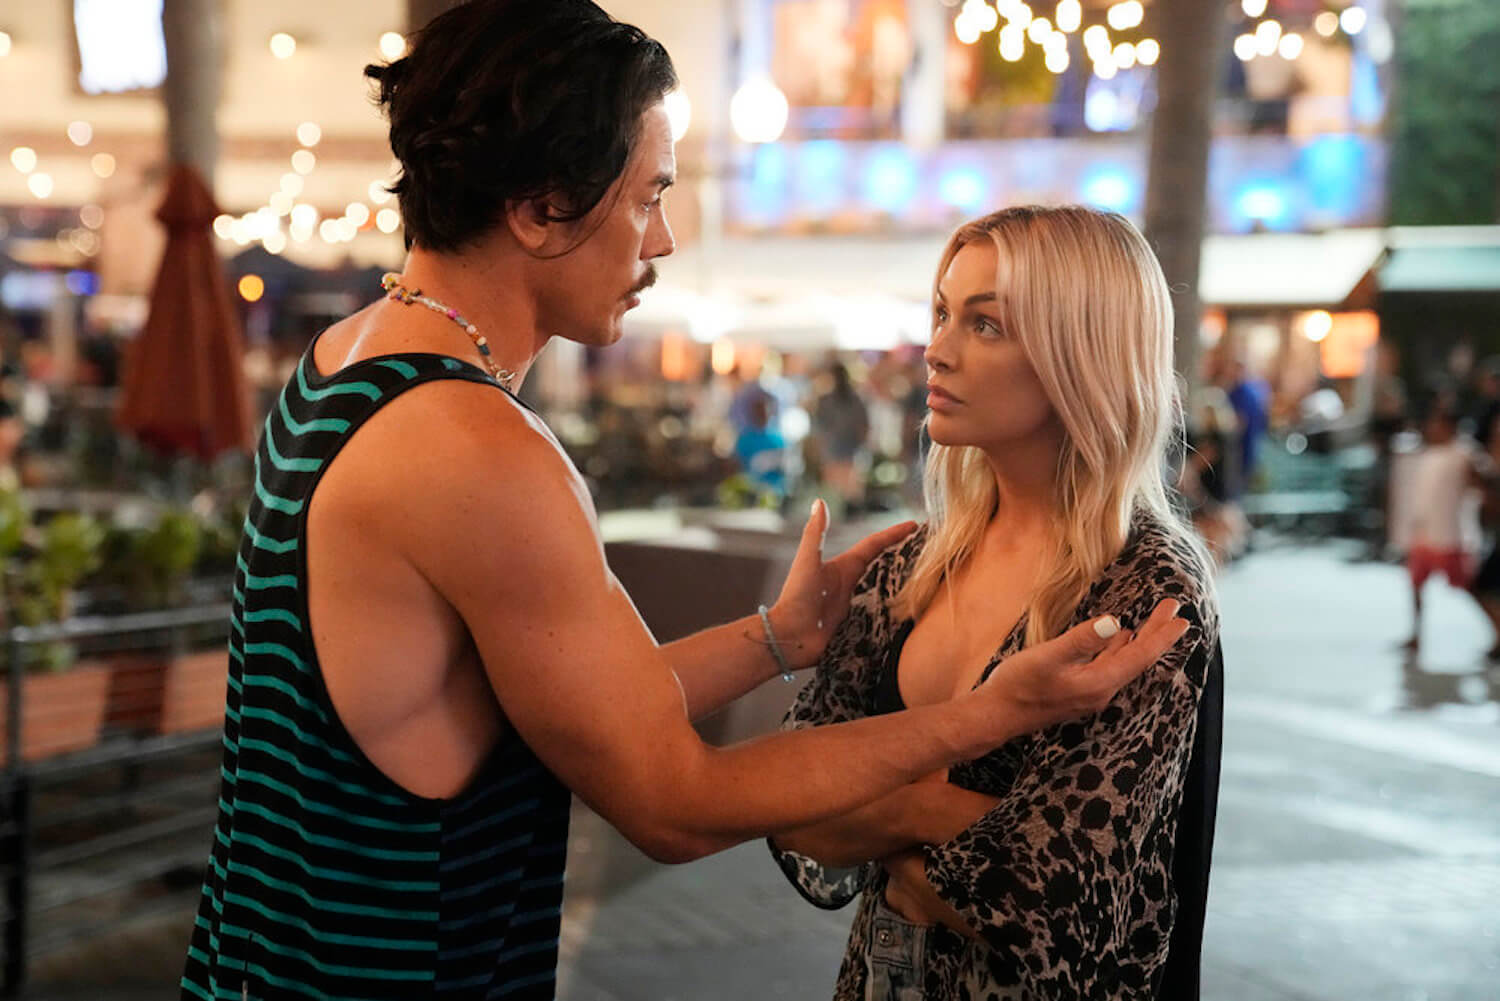 'Vanderpump Rules' stars Tom Sandoval and Lala Kent having a serious discussion in a production still from season 10. A new teaser for 'Vanderpump Rules' shows Lala become suspicious of Raquel in Vegas.